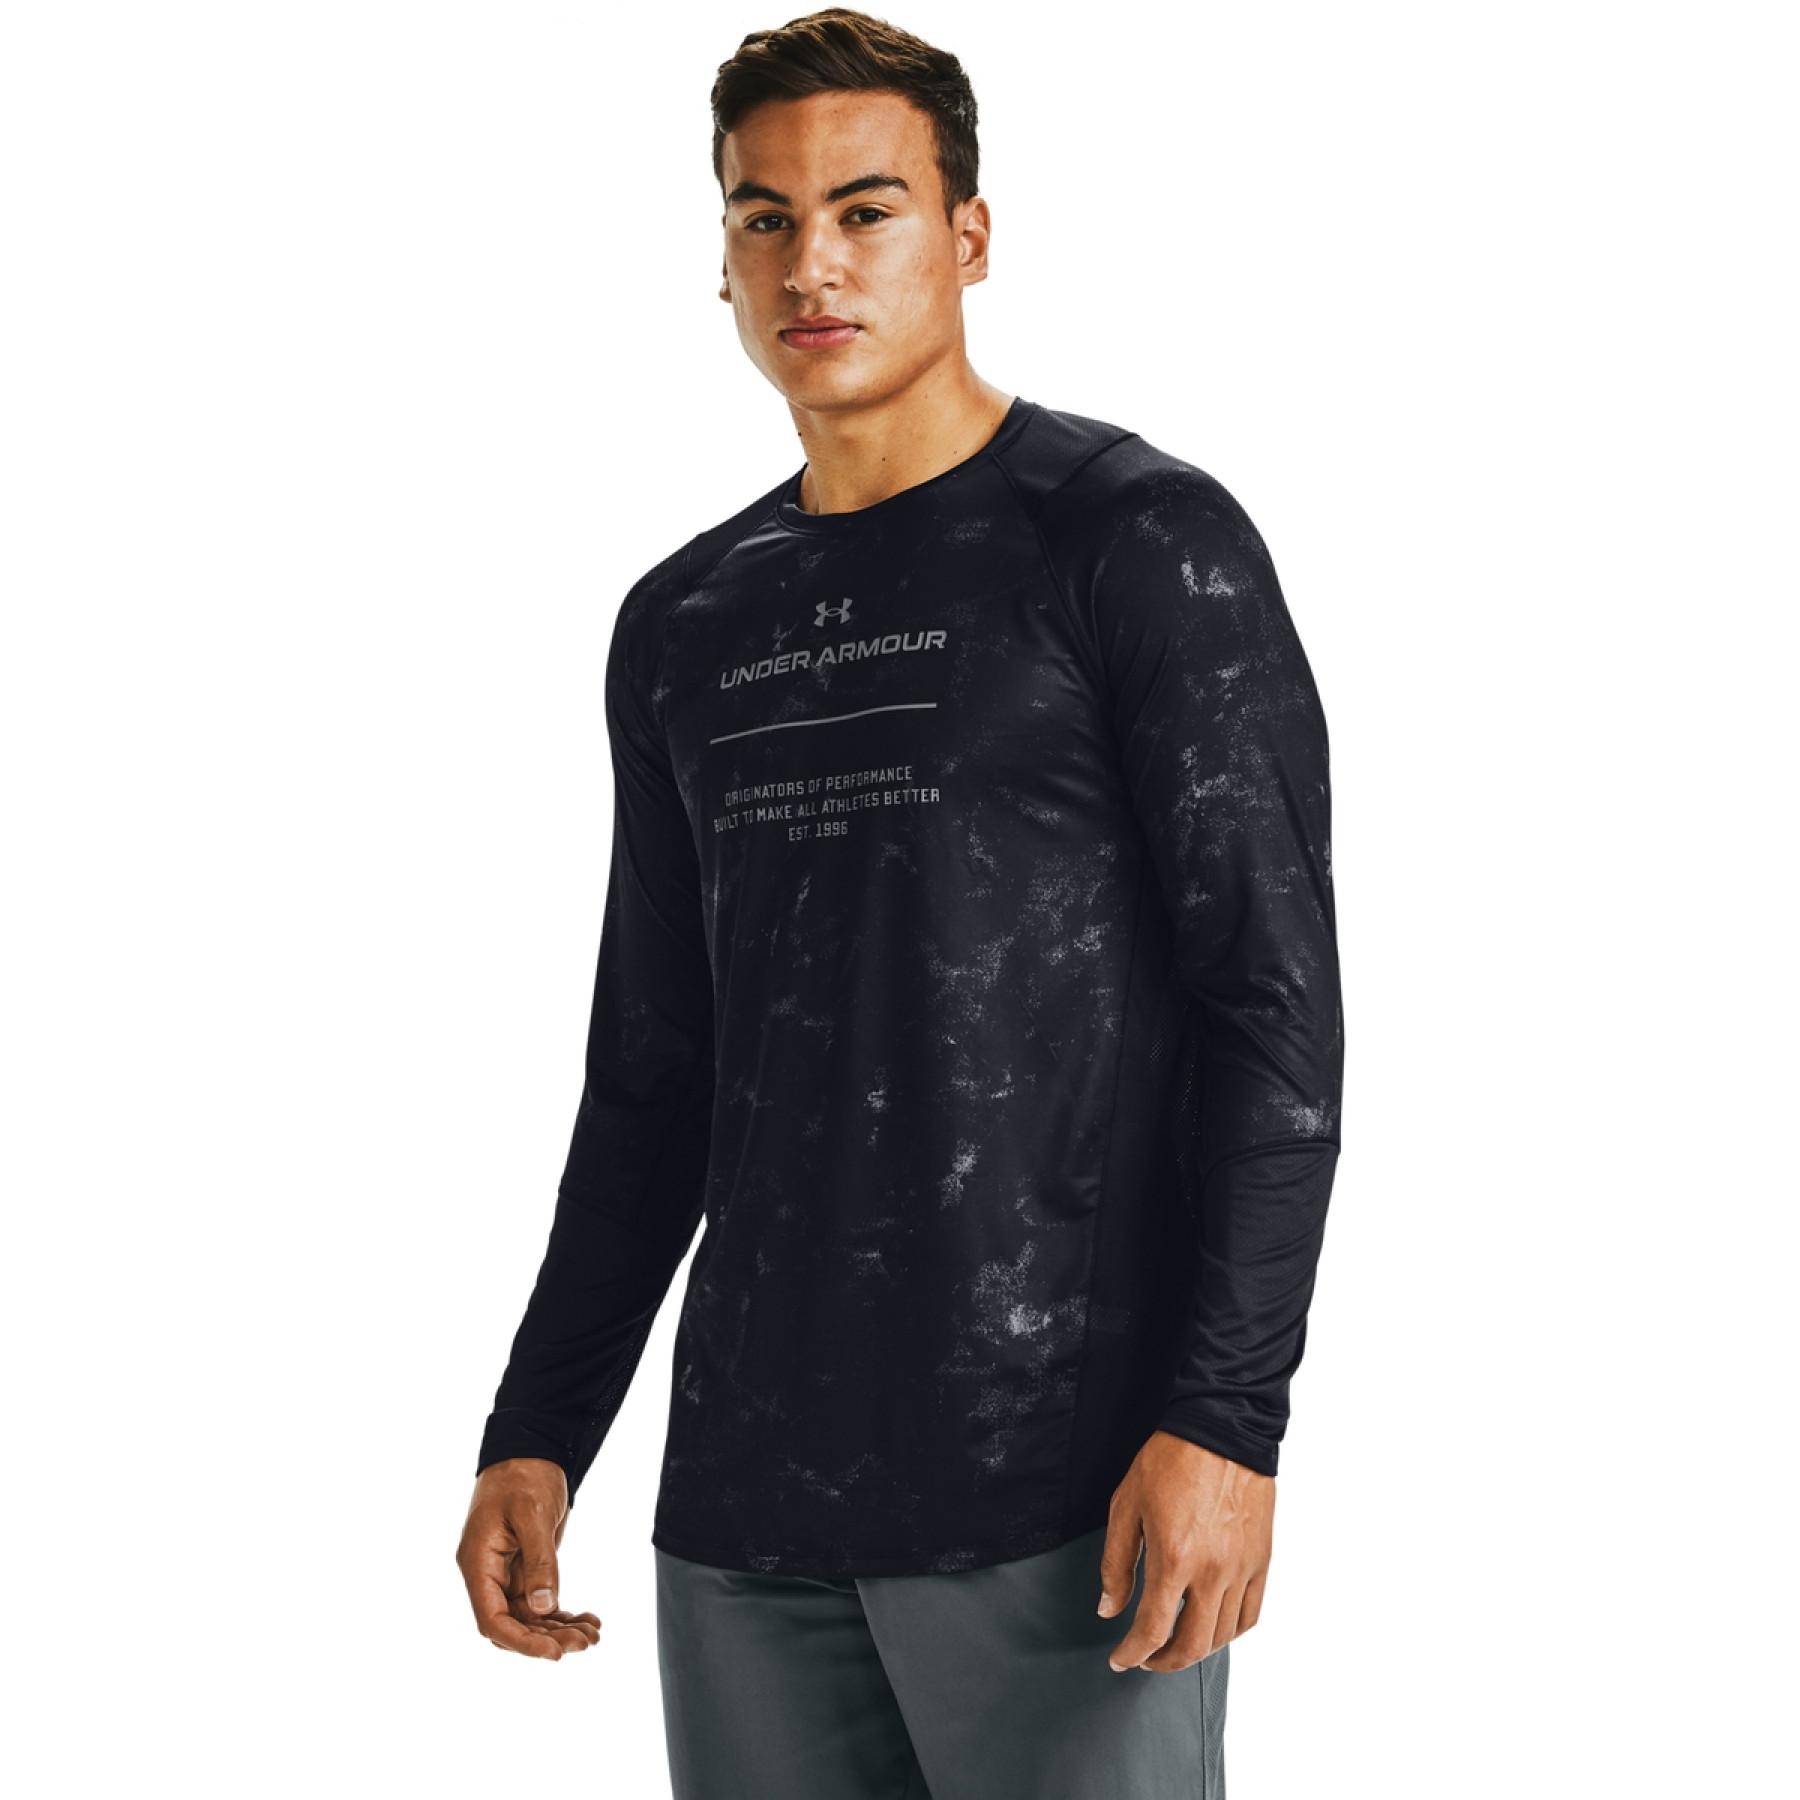 Under Armour Long Sleeve Shirt MK-1 Graphic